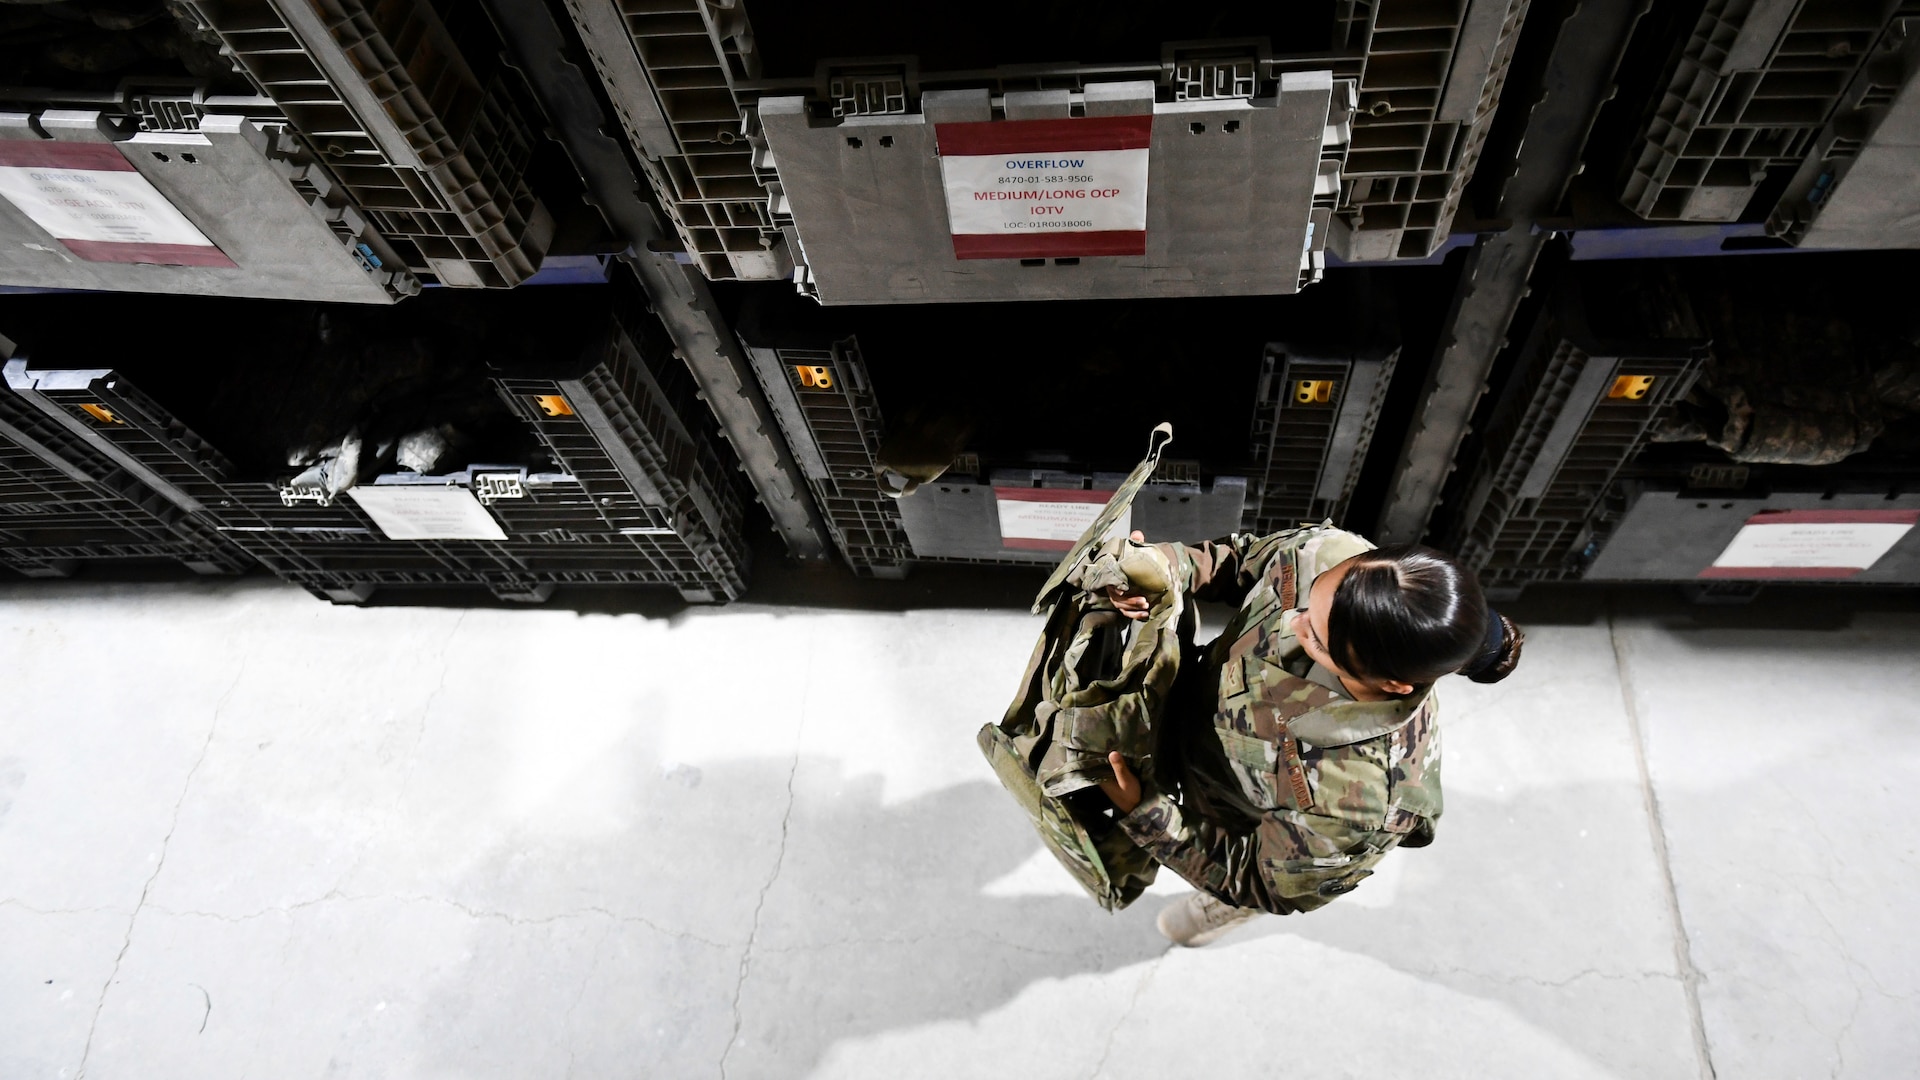 Airman 1st Class Brianna Renninger, 386th Expeditionary Logistics Readiness Squadron expeditionary theater distribution center journeyman, picks a piece of body armor from a bin at Ali Al Salem Air Base, Kuwait, Aug. 13, 2019. Theater distribution facilities stock items in theater for forward-deploying Airmen. Having the stock in country eliminates the need to transport the additional weight and mission-essential gear during military movements. (U.S. Air Force photo by Staff Sgt. Mozer O. Da Cunha)